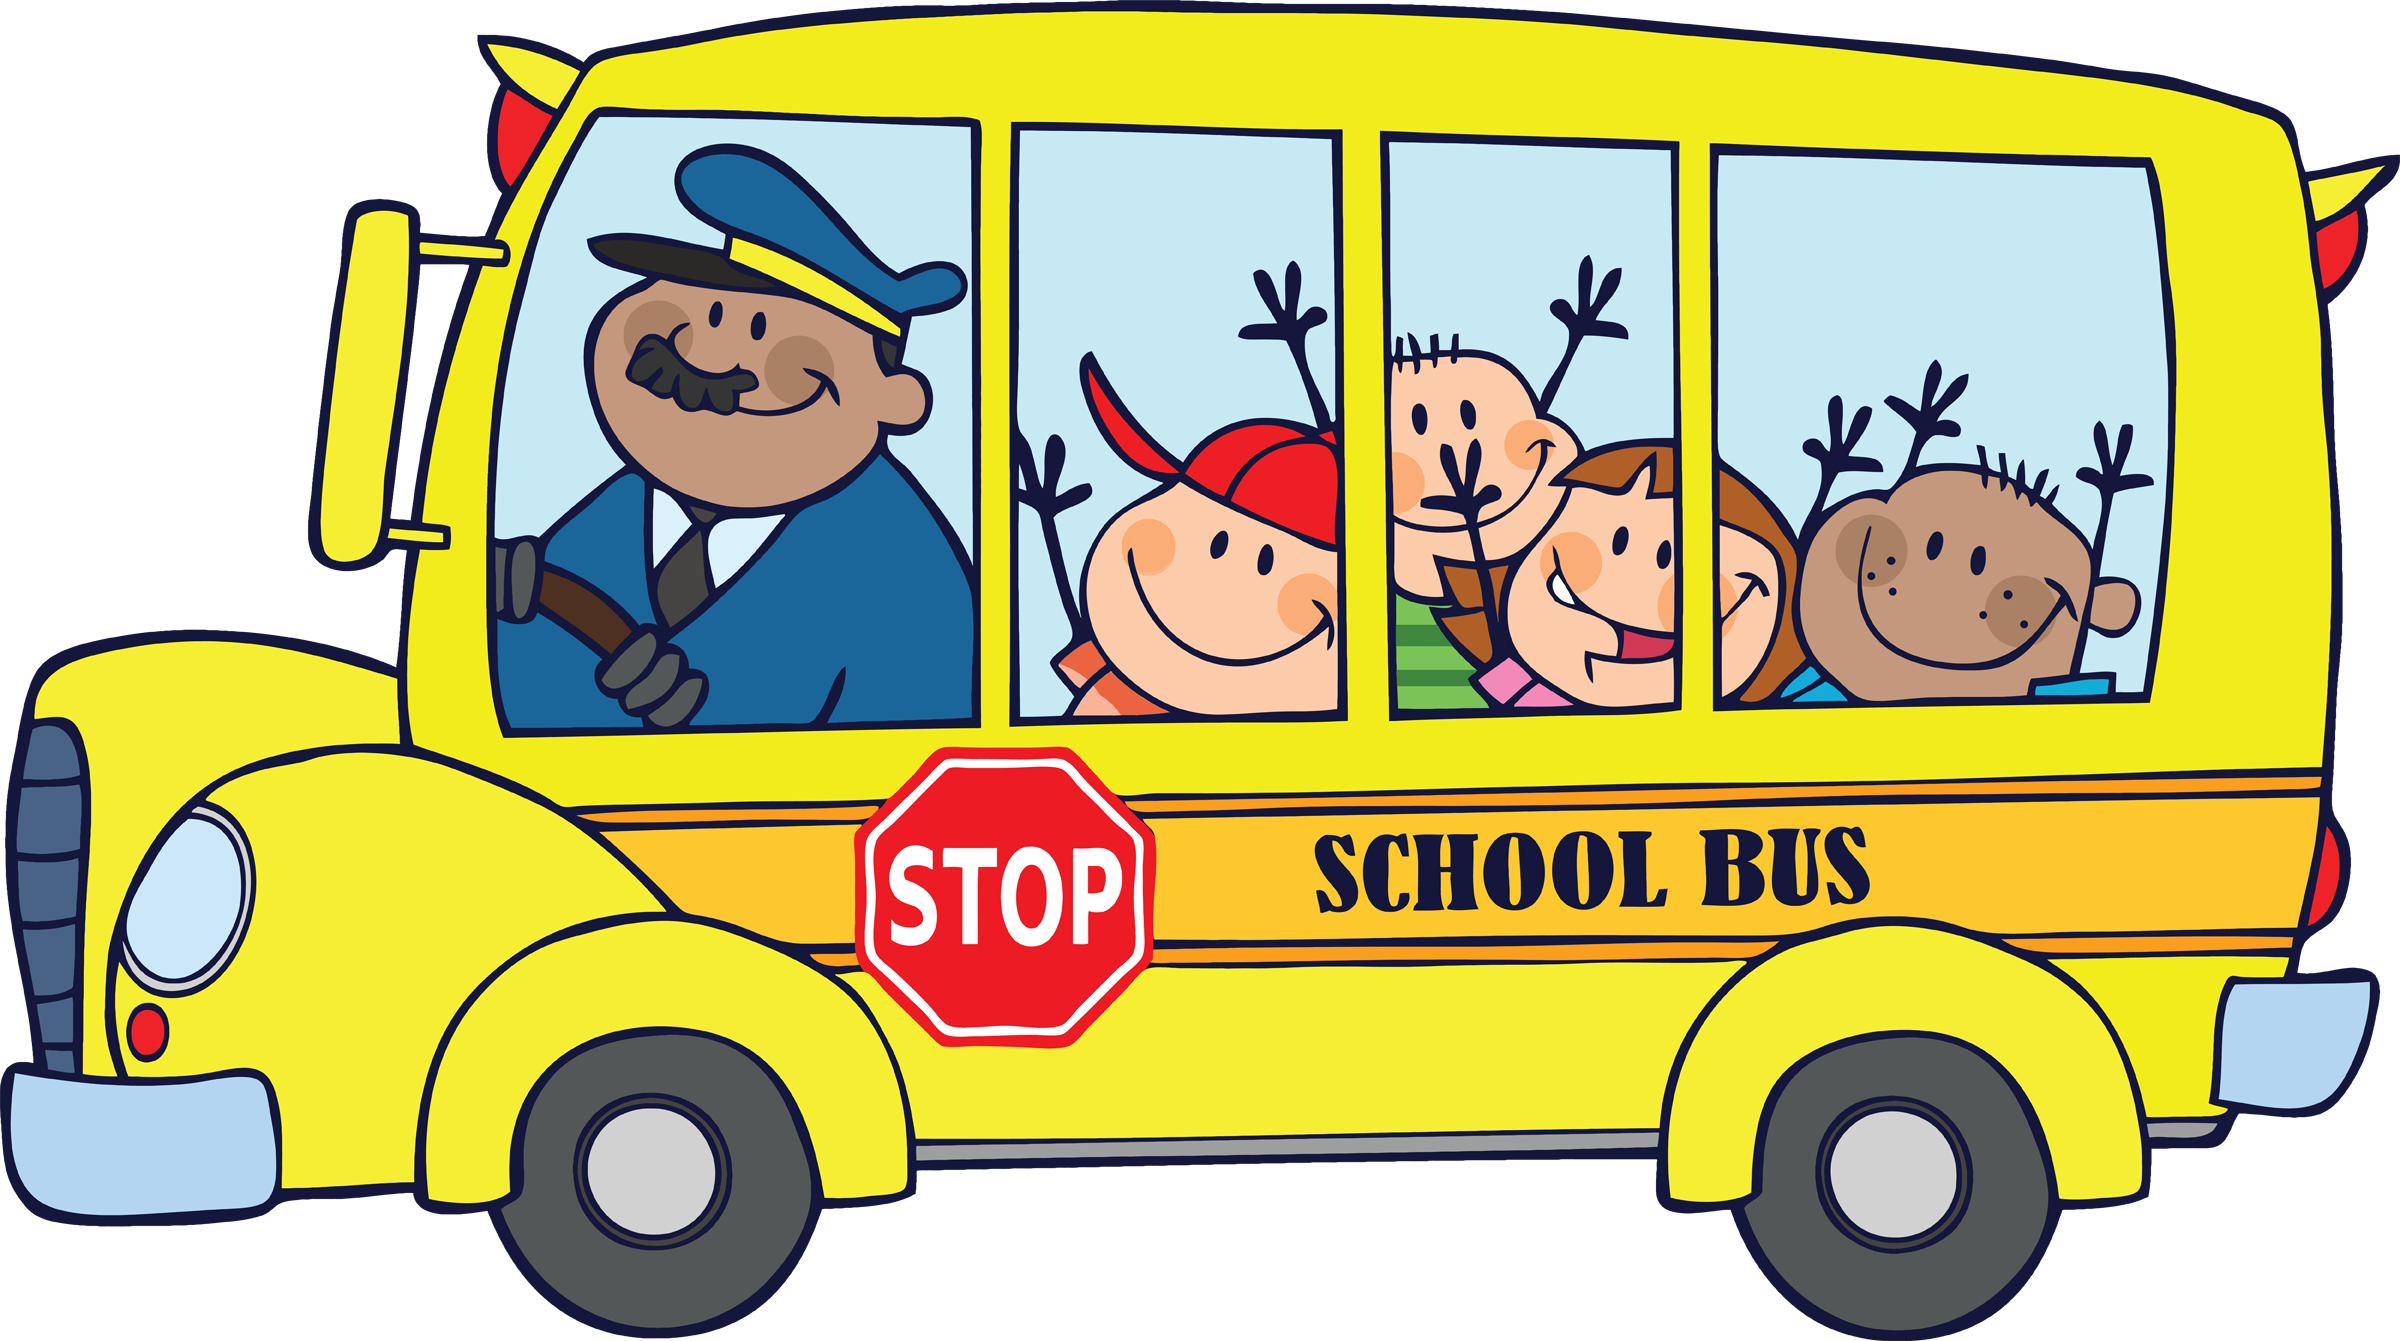 Clipart images of school busses